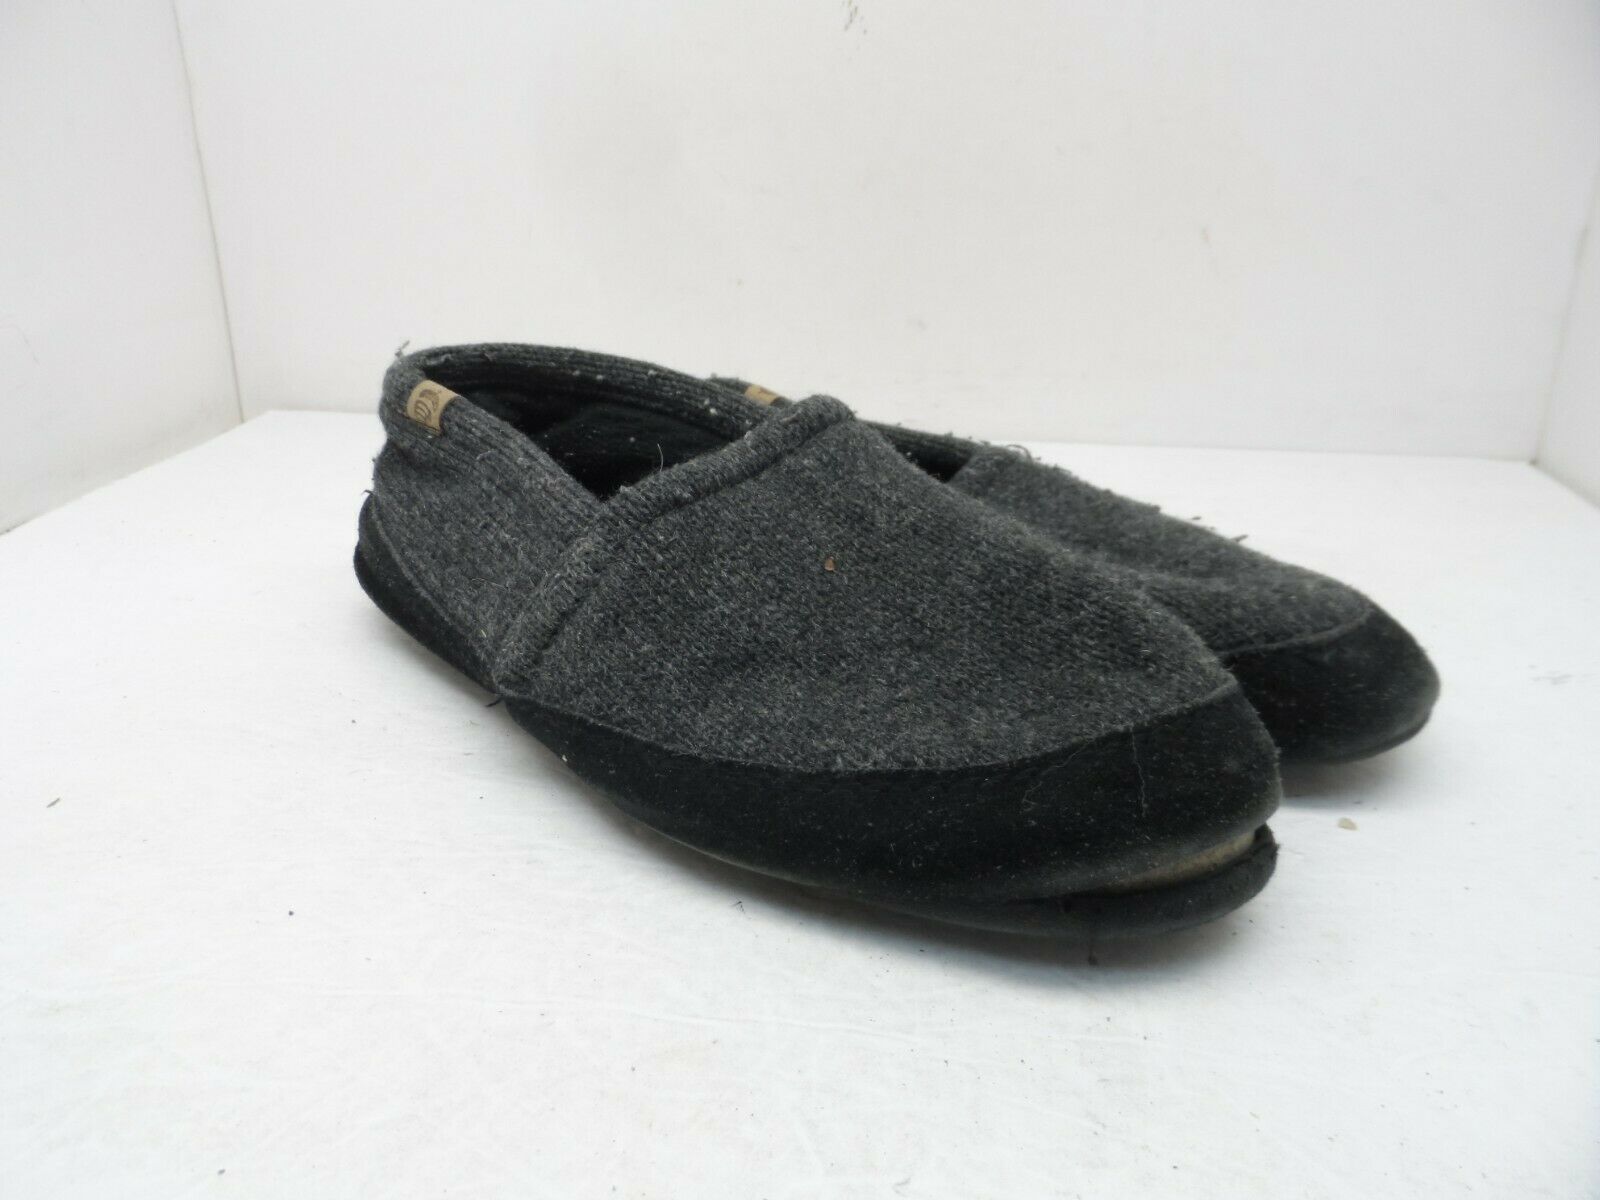 Primary image for Acorn Men's Moc Slip-On Summerweight Slippers Grey/Black Size 9-10M